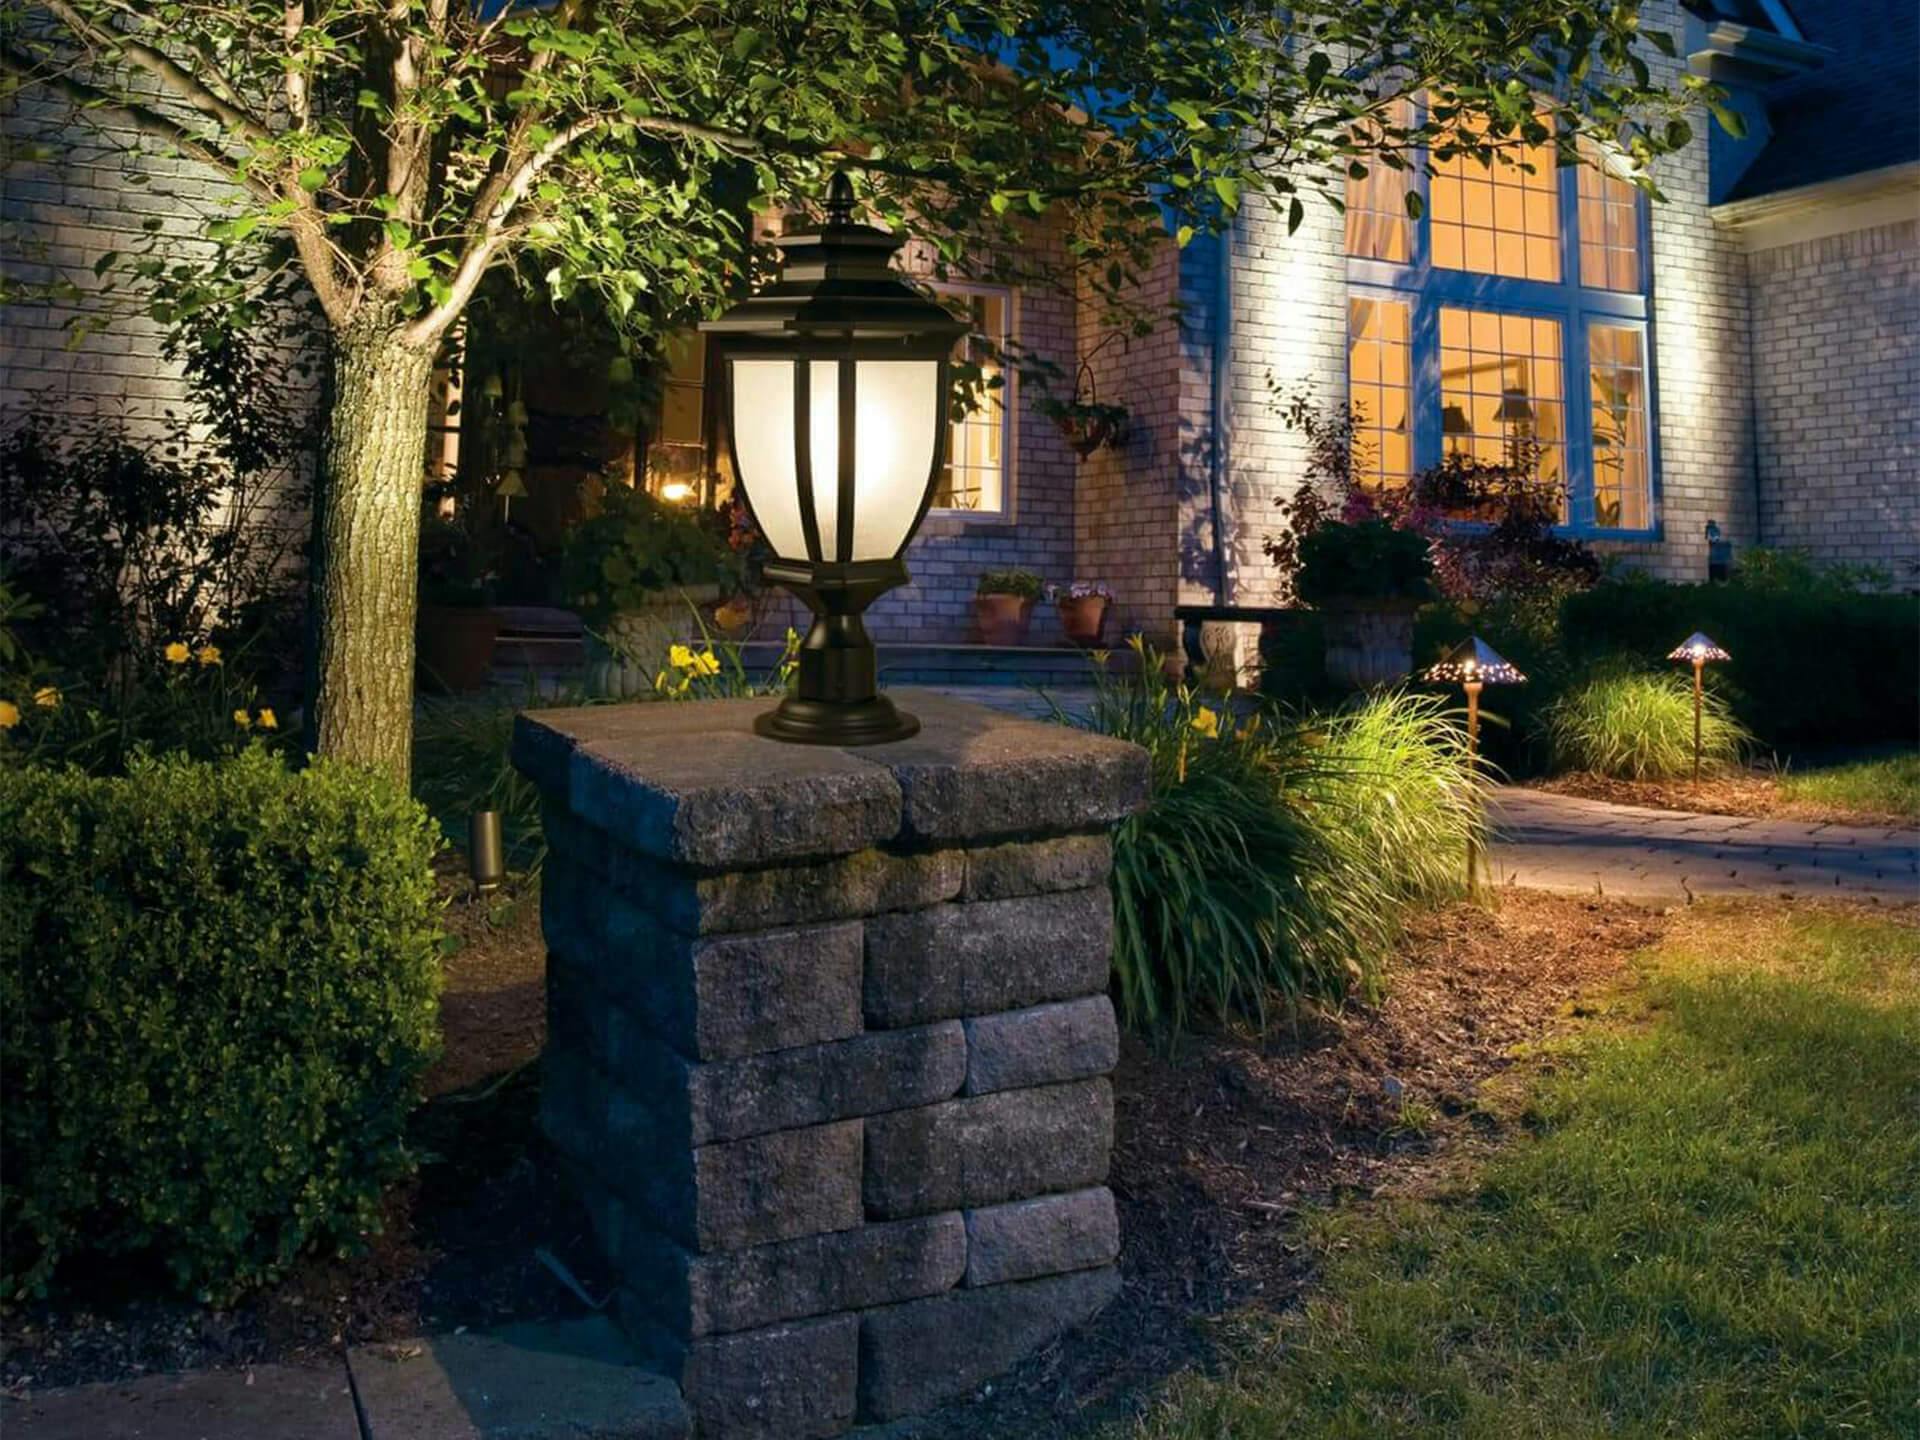 Exterior image of a front yard with a post light lighting up the yard during the night